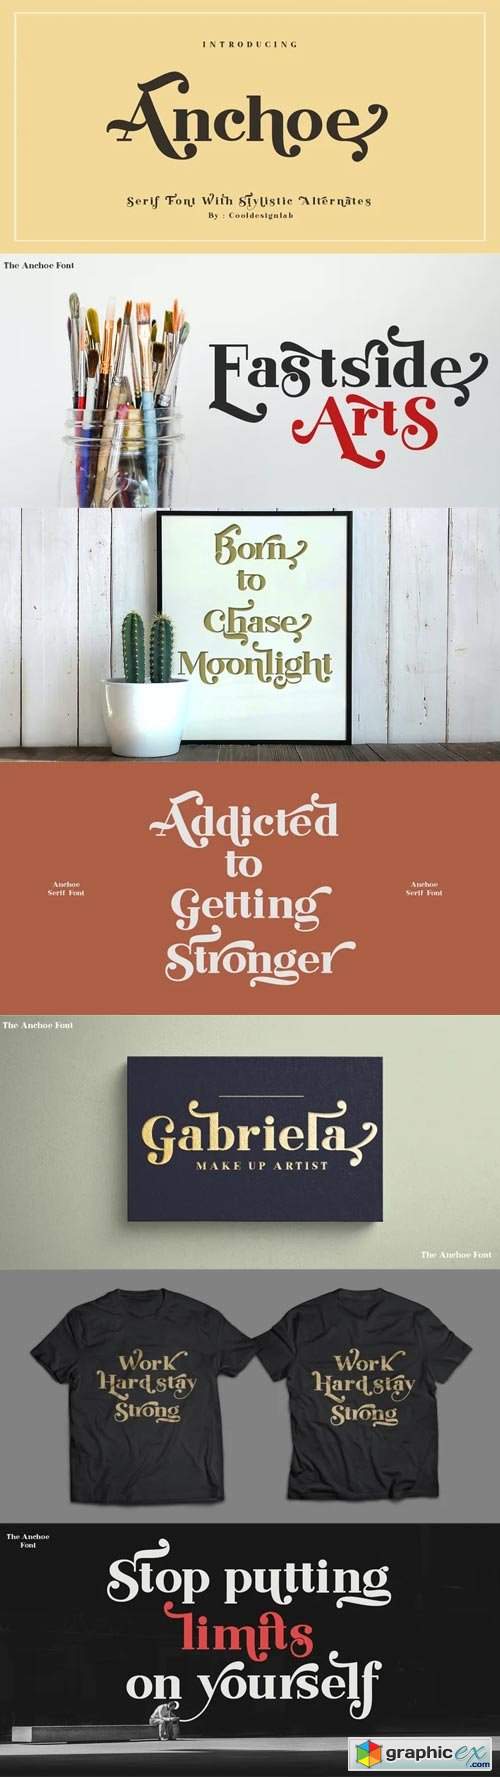  Anchoe Font 